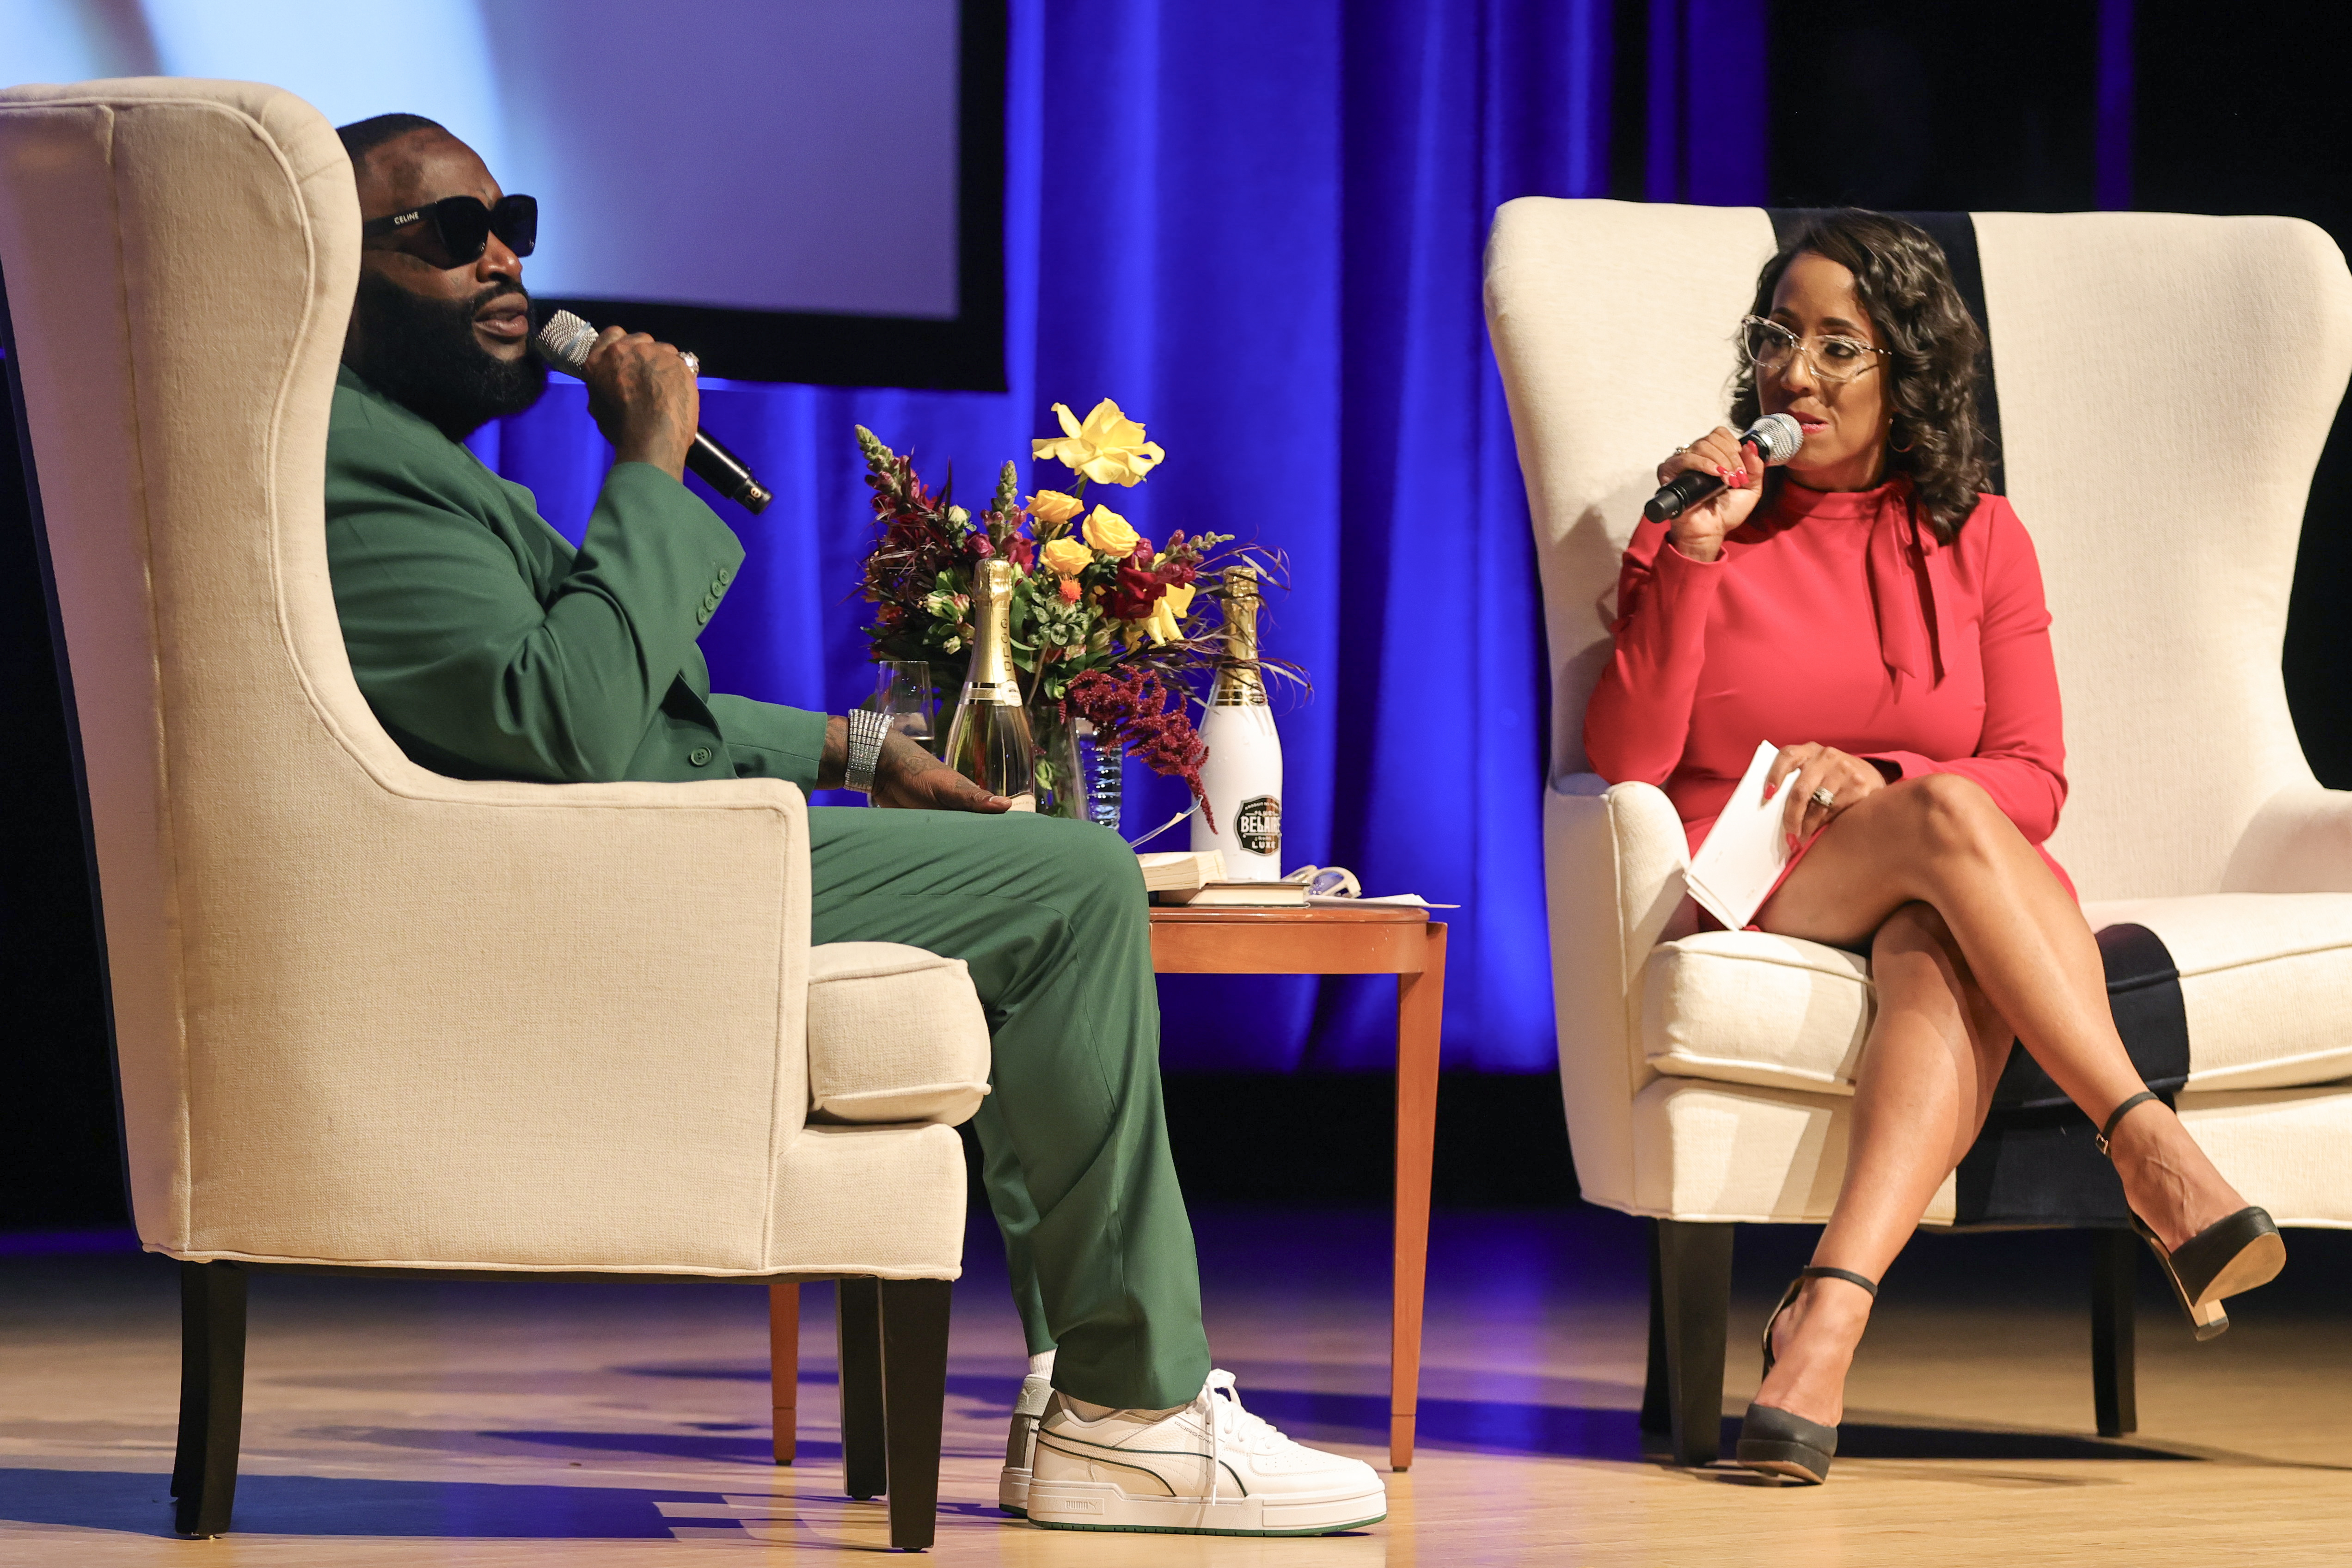 Classes on celebrities like Taylor Swift, Rick Ross engage new